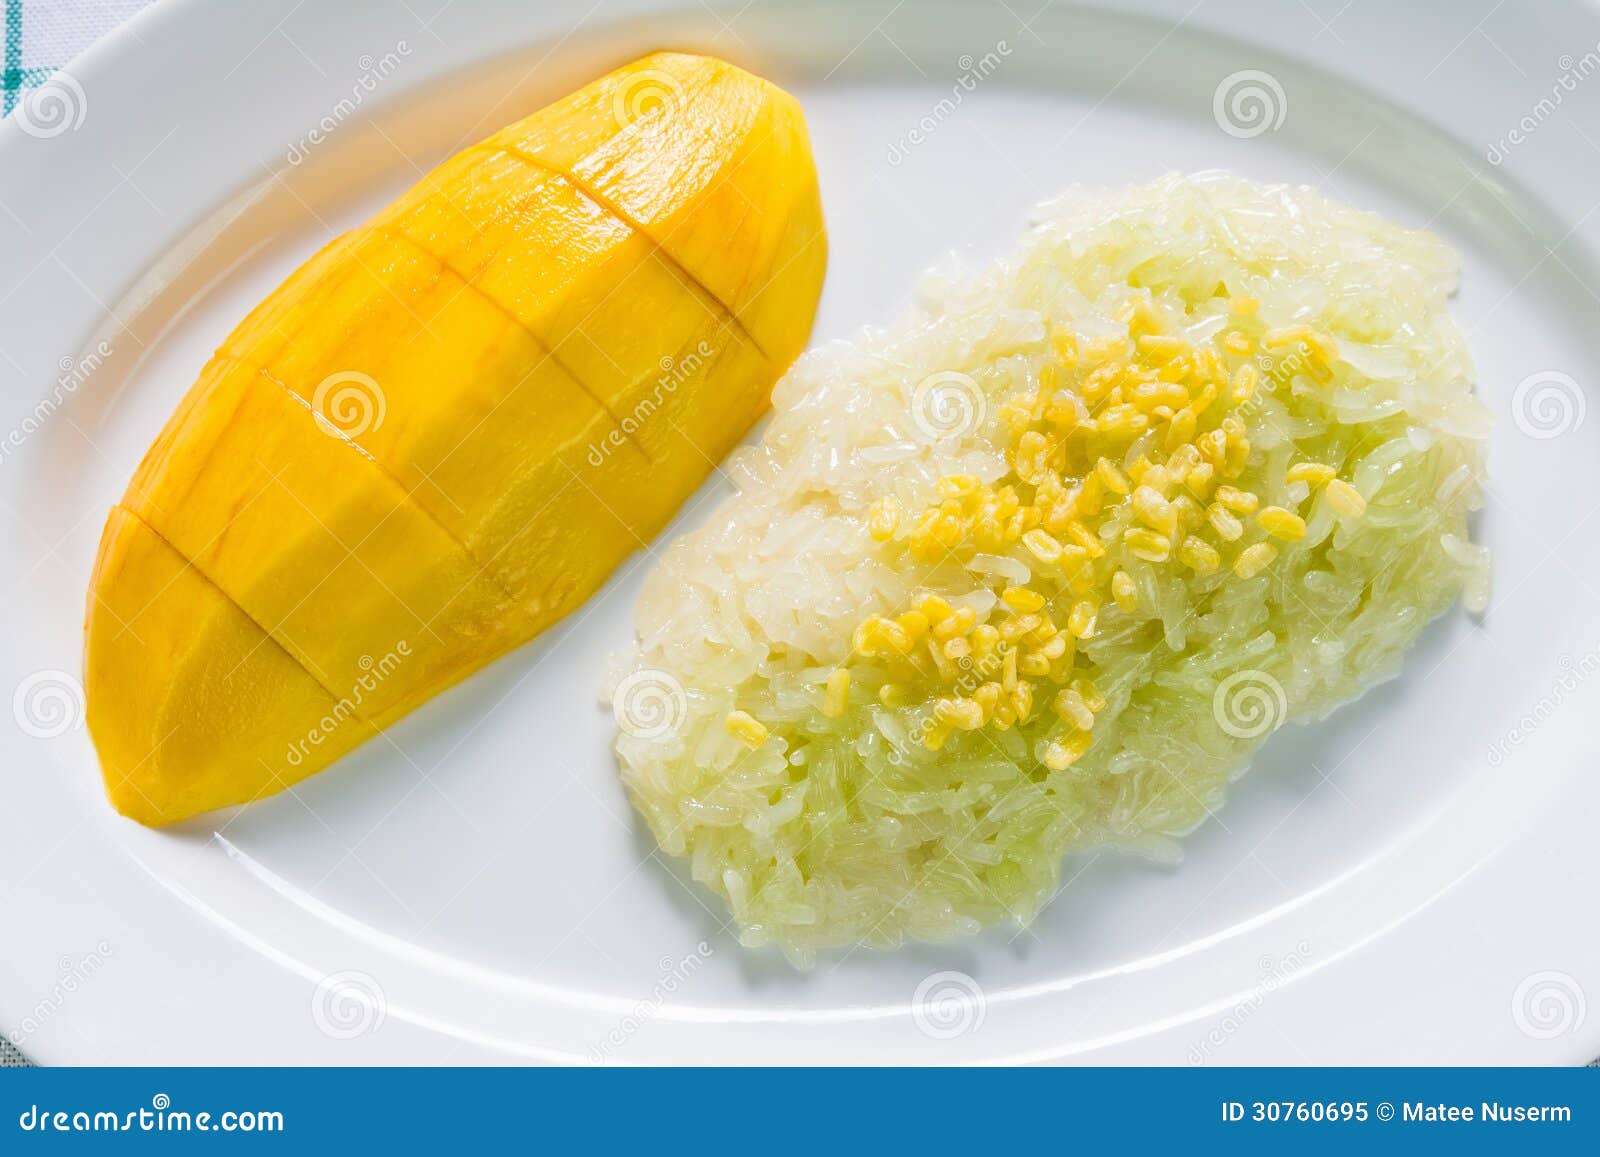 https://thumbs.dreamstime.com/z/sweet-coconut-sticky-rice-mango-khao-niao-mamuang-ripe-cooked-milk-topping-roast-mung-bean-thai-traditional-dessert-30760695.jpg